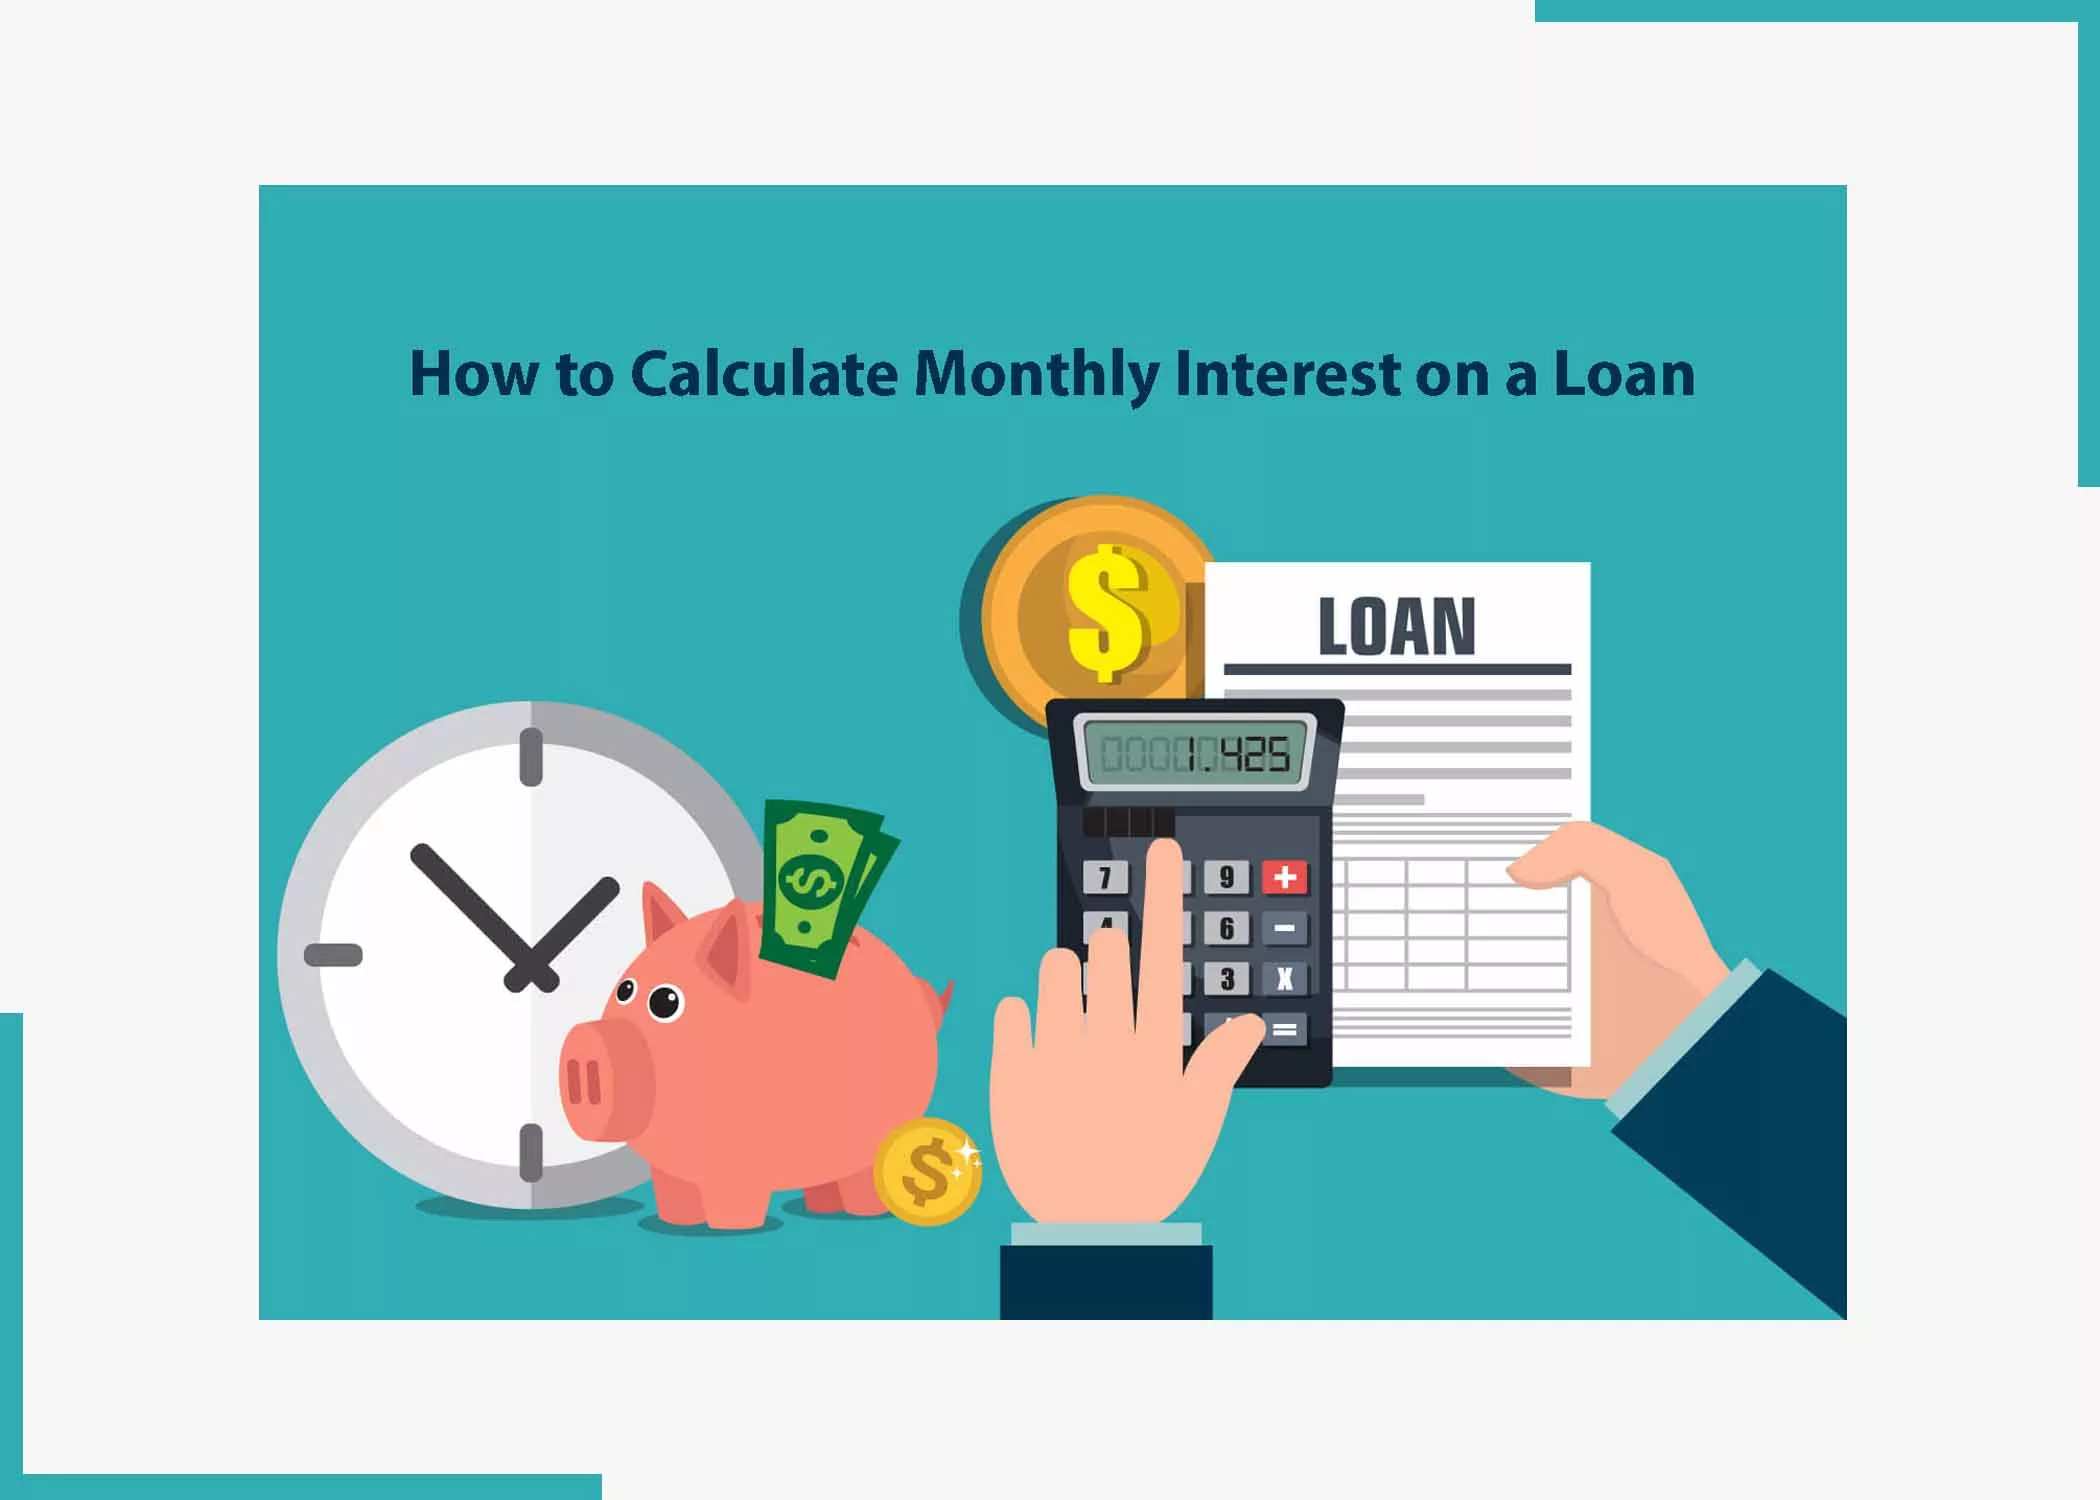 How to Calculate Monthly Interest on a Loan